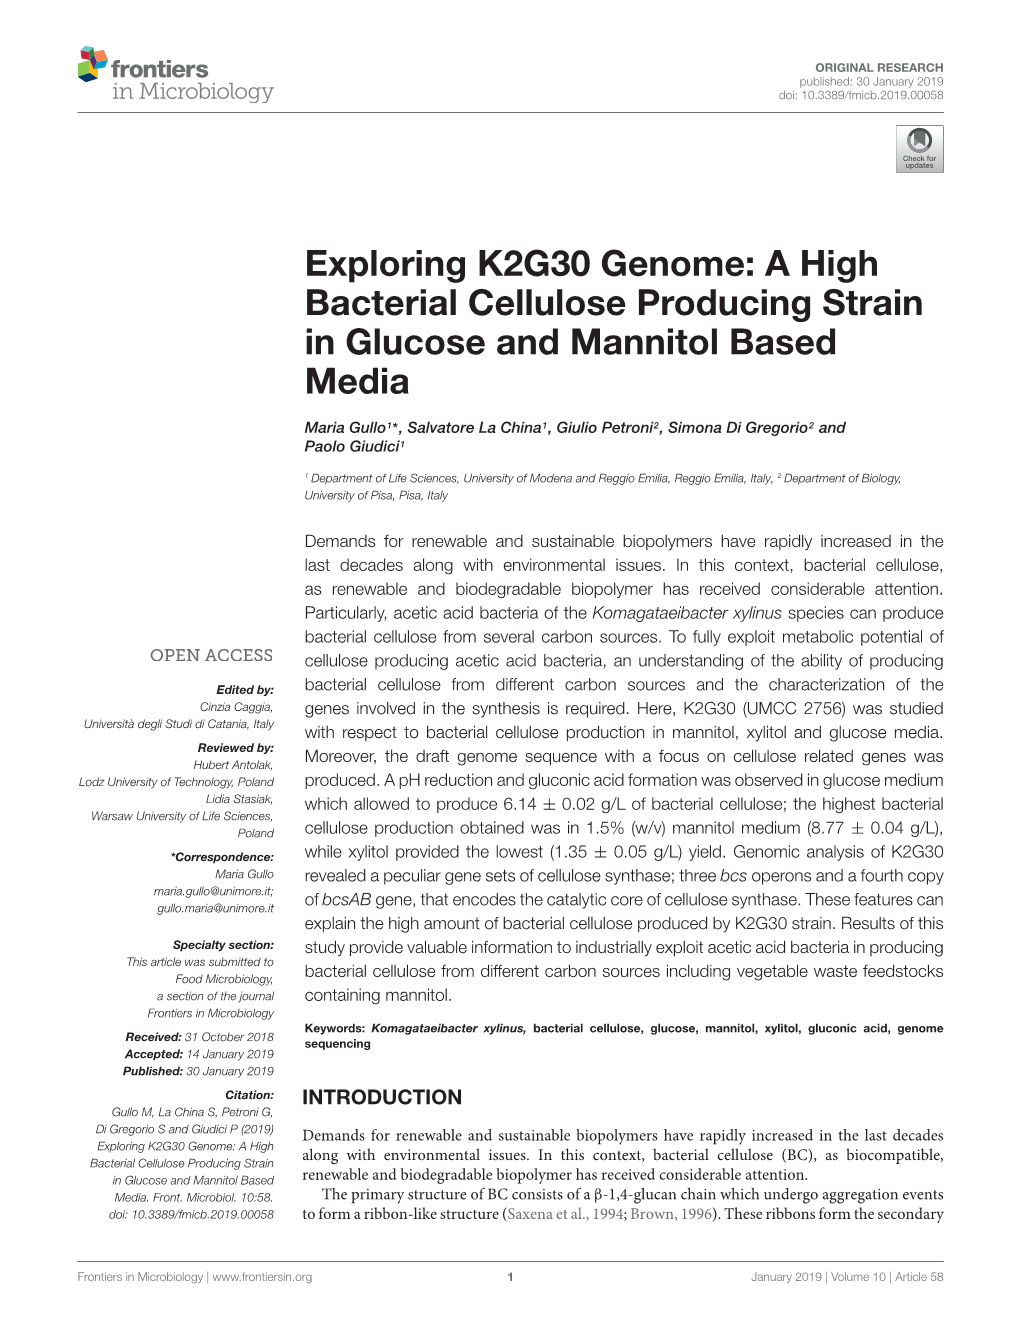 A High Bacterial Cellulose Producing Strain in Glucose and Mannitol Based Media